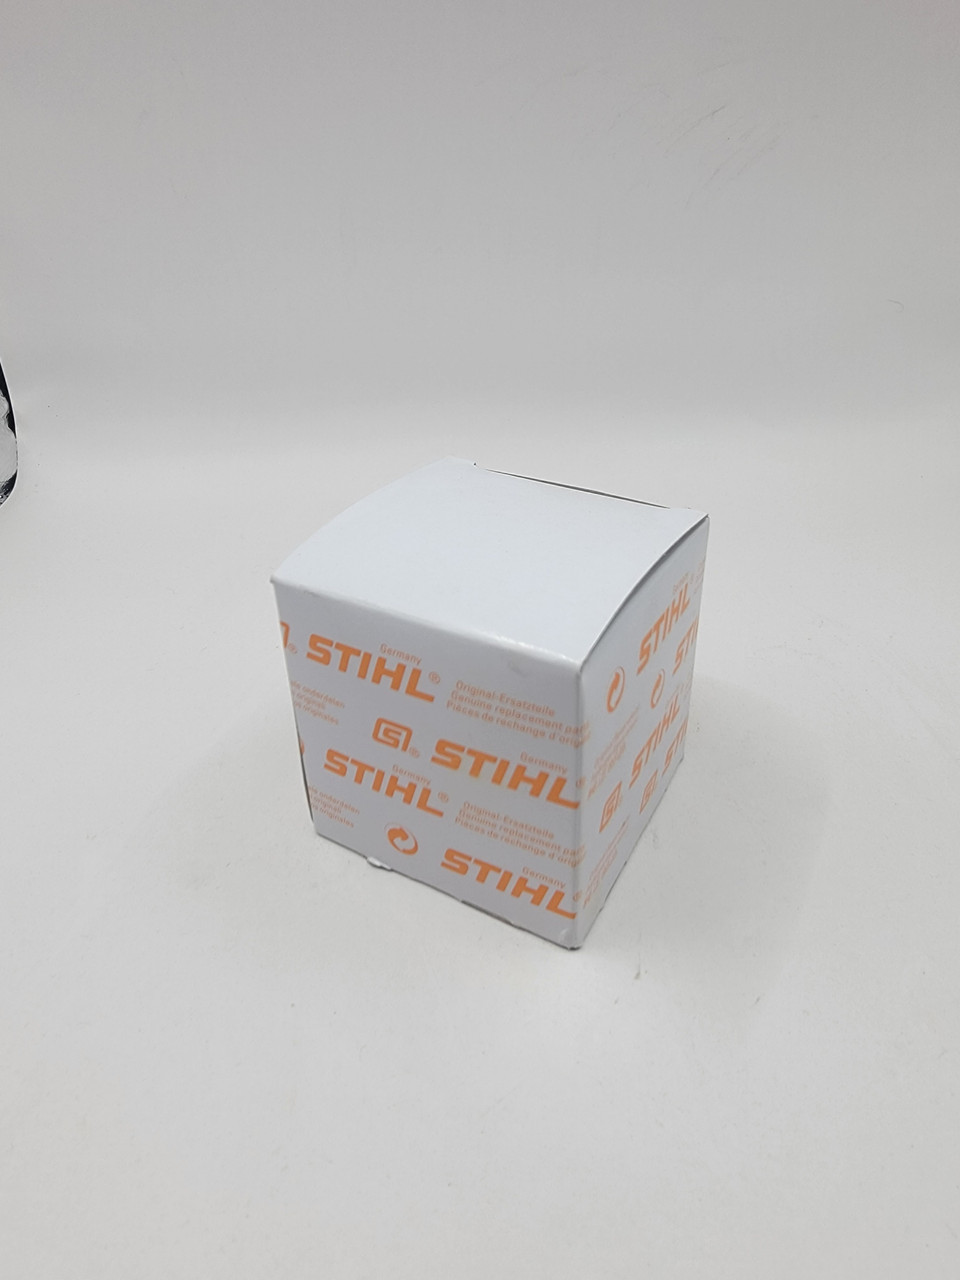 Stihl 4601 640 7501 SPUR GEAR MM 55 one package